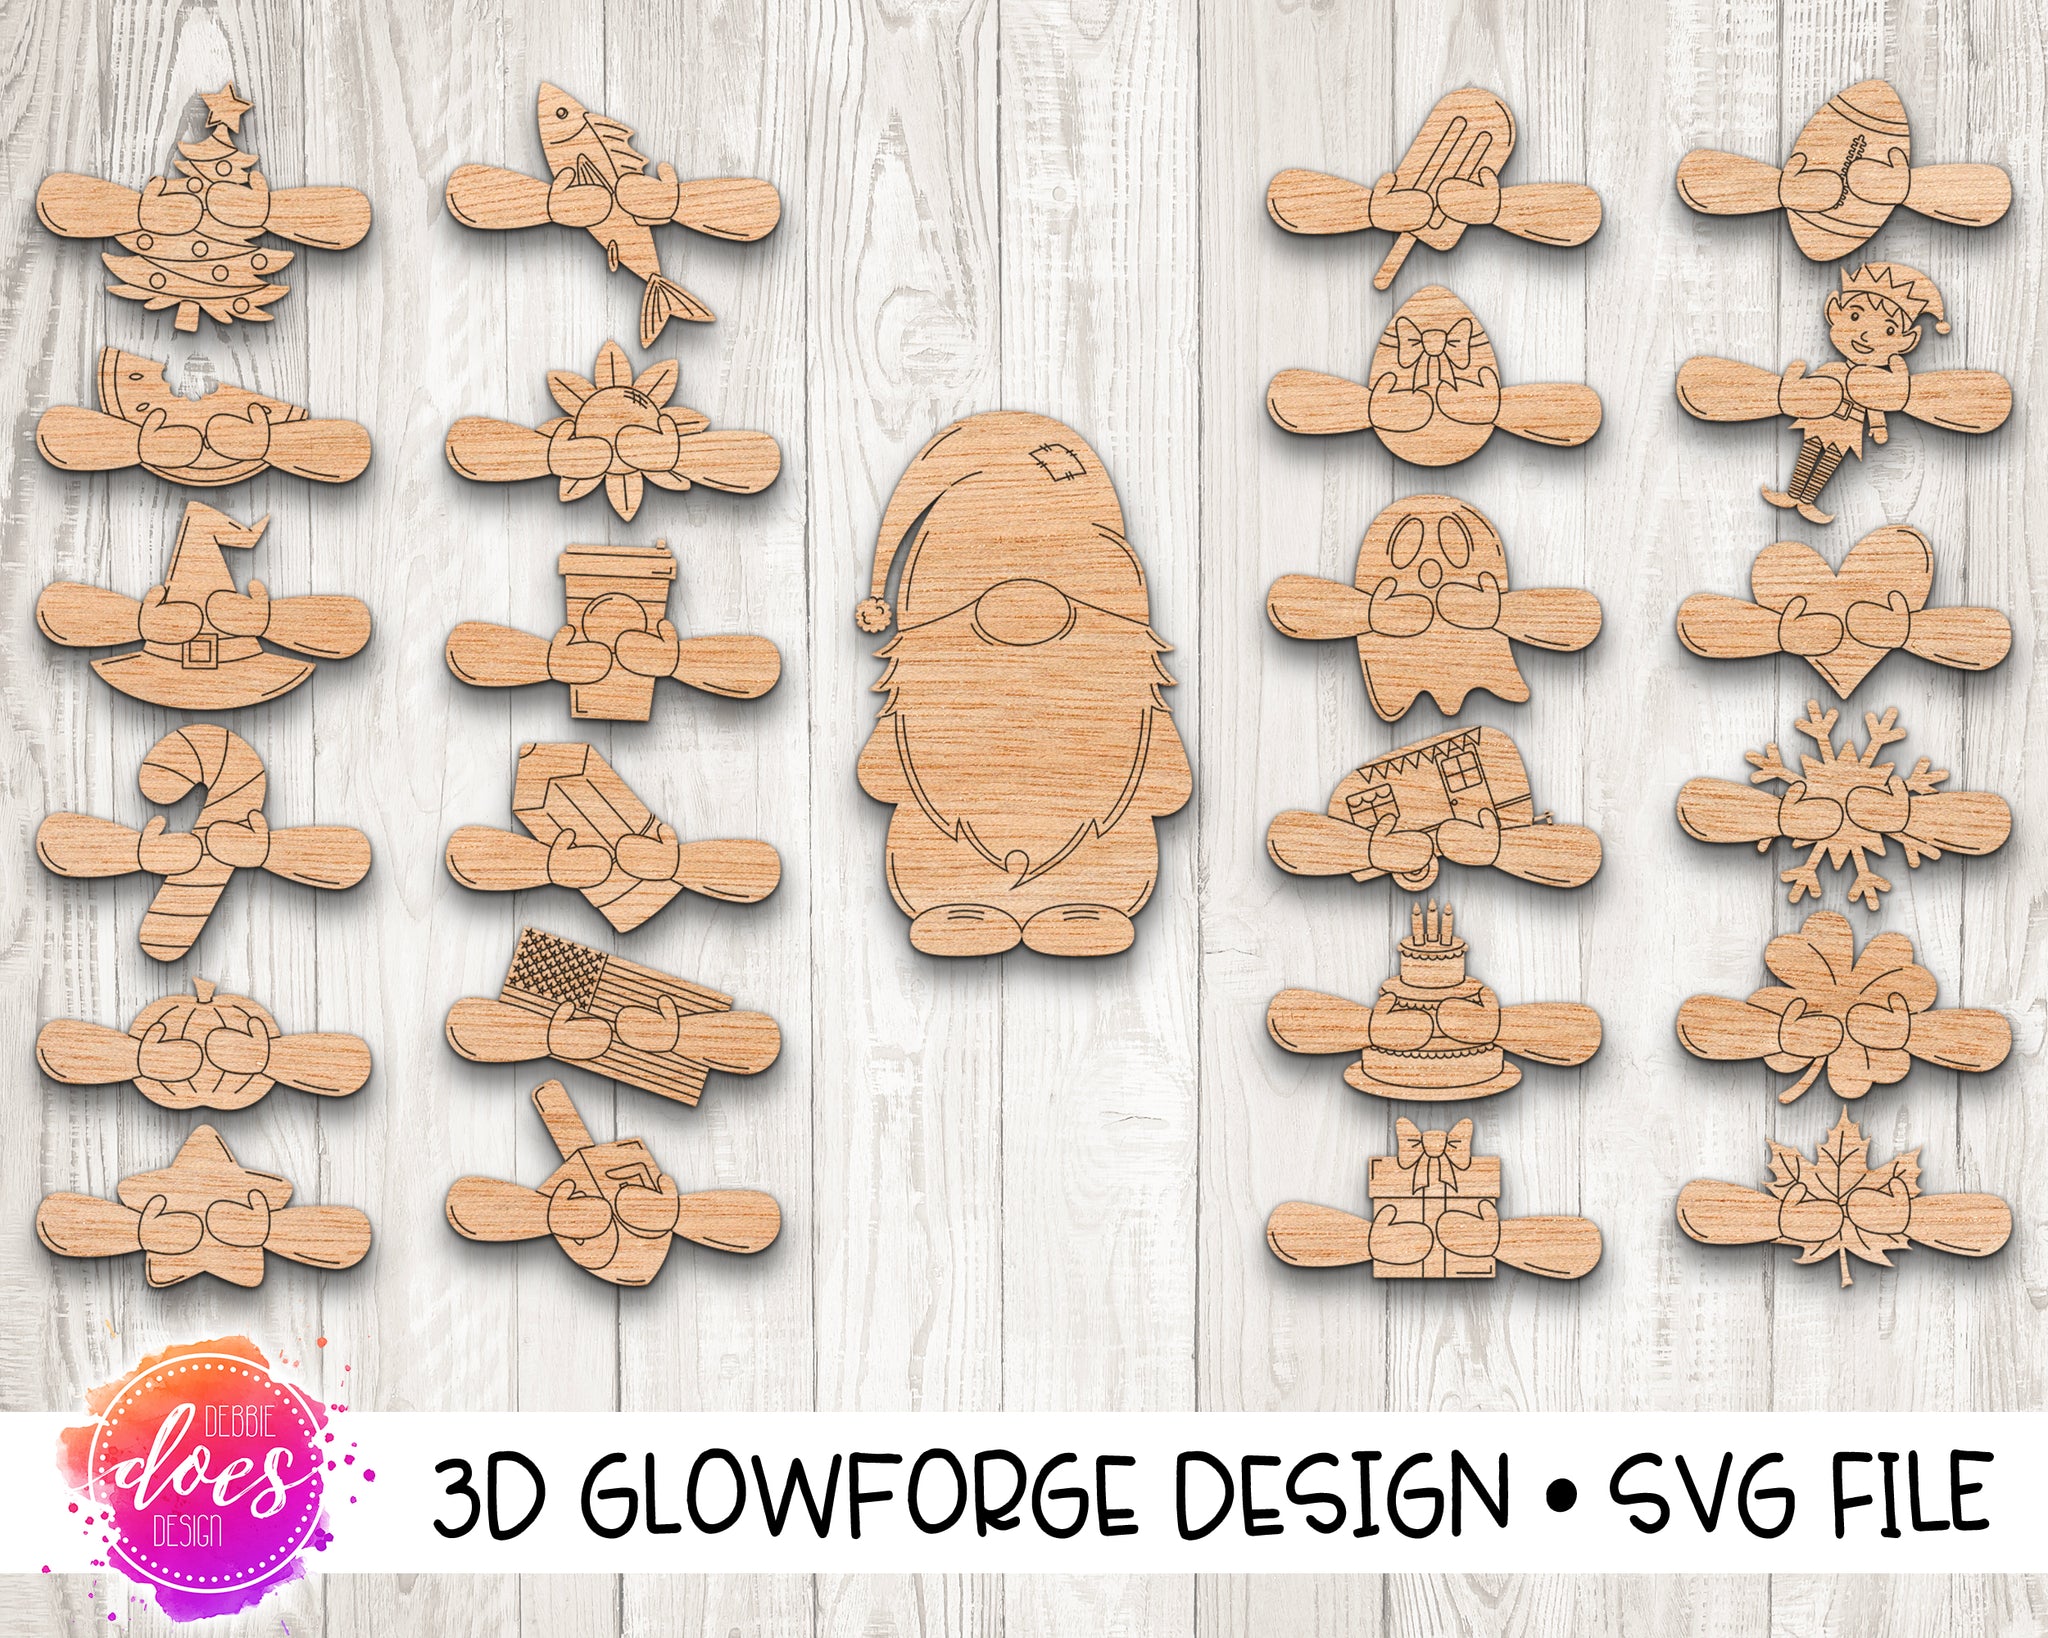 Download Interchangeable Gnome With 24 Attachments Glowforge Design Debbie Does Design